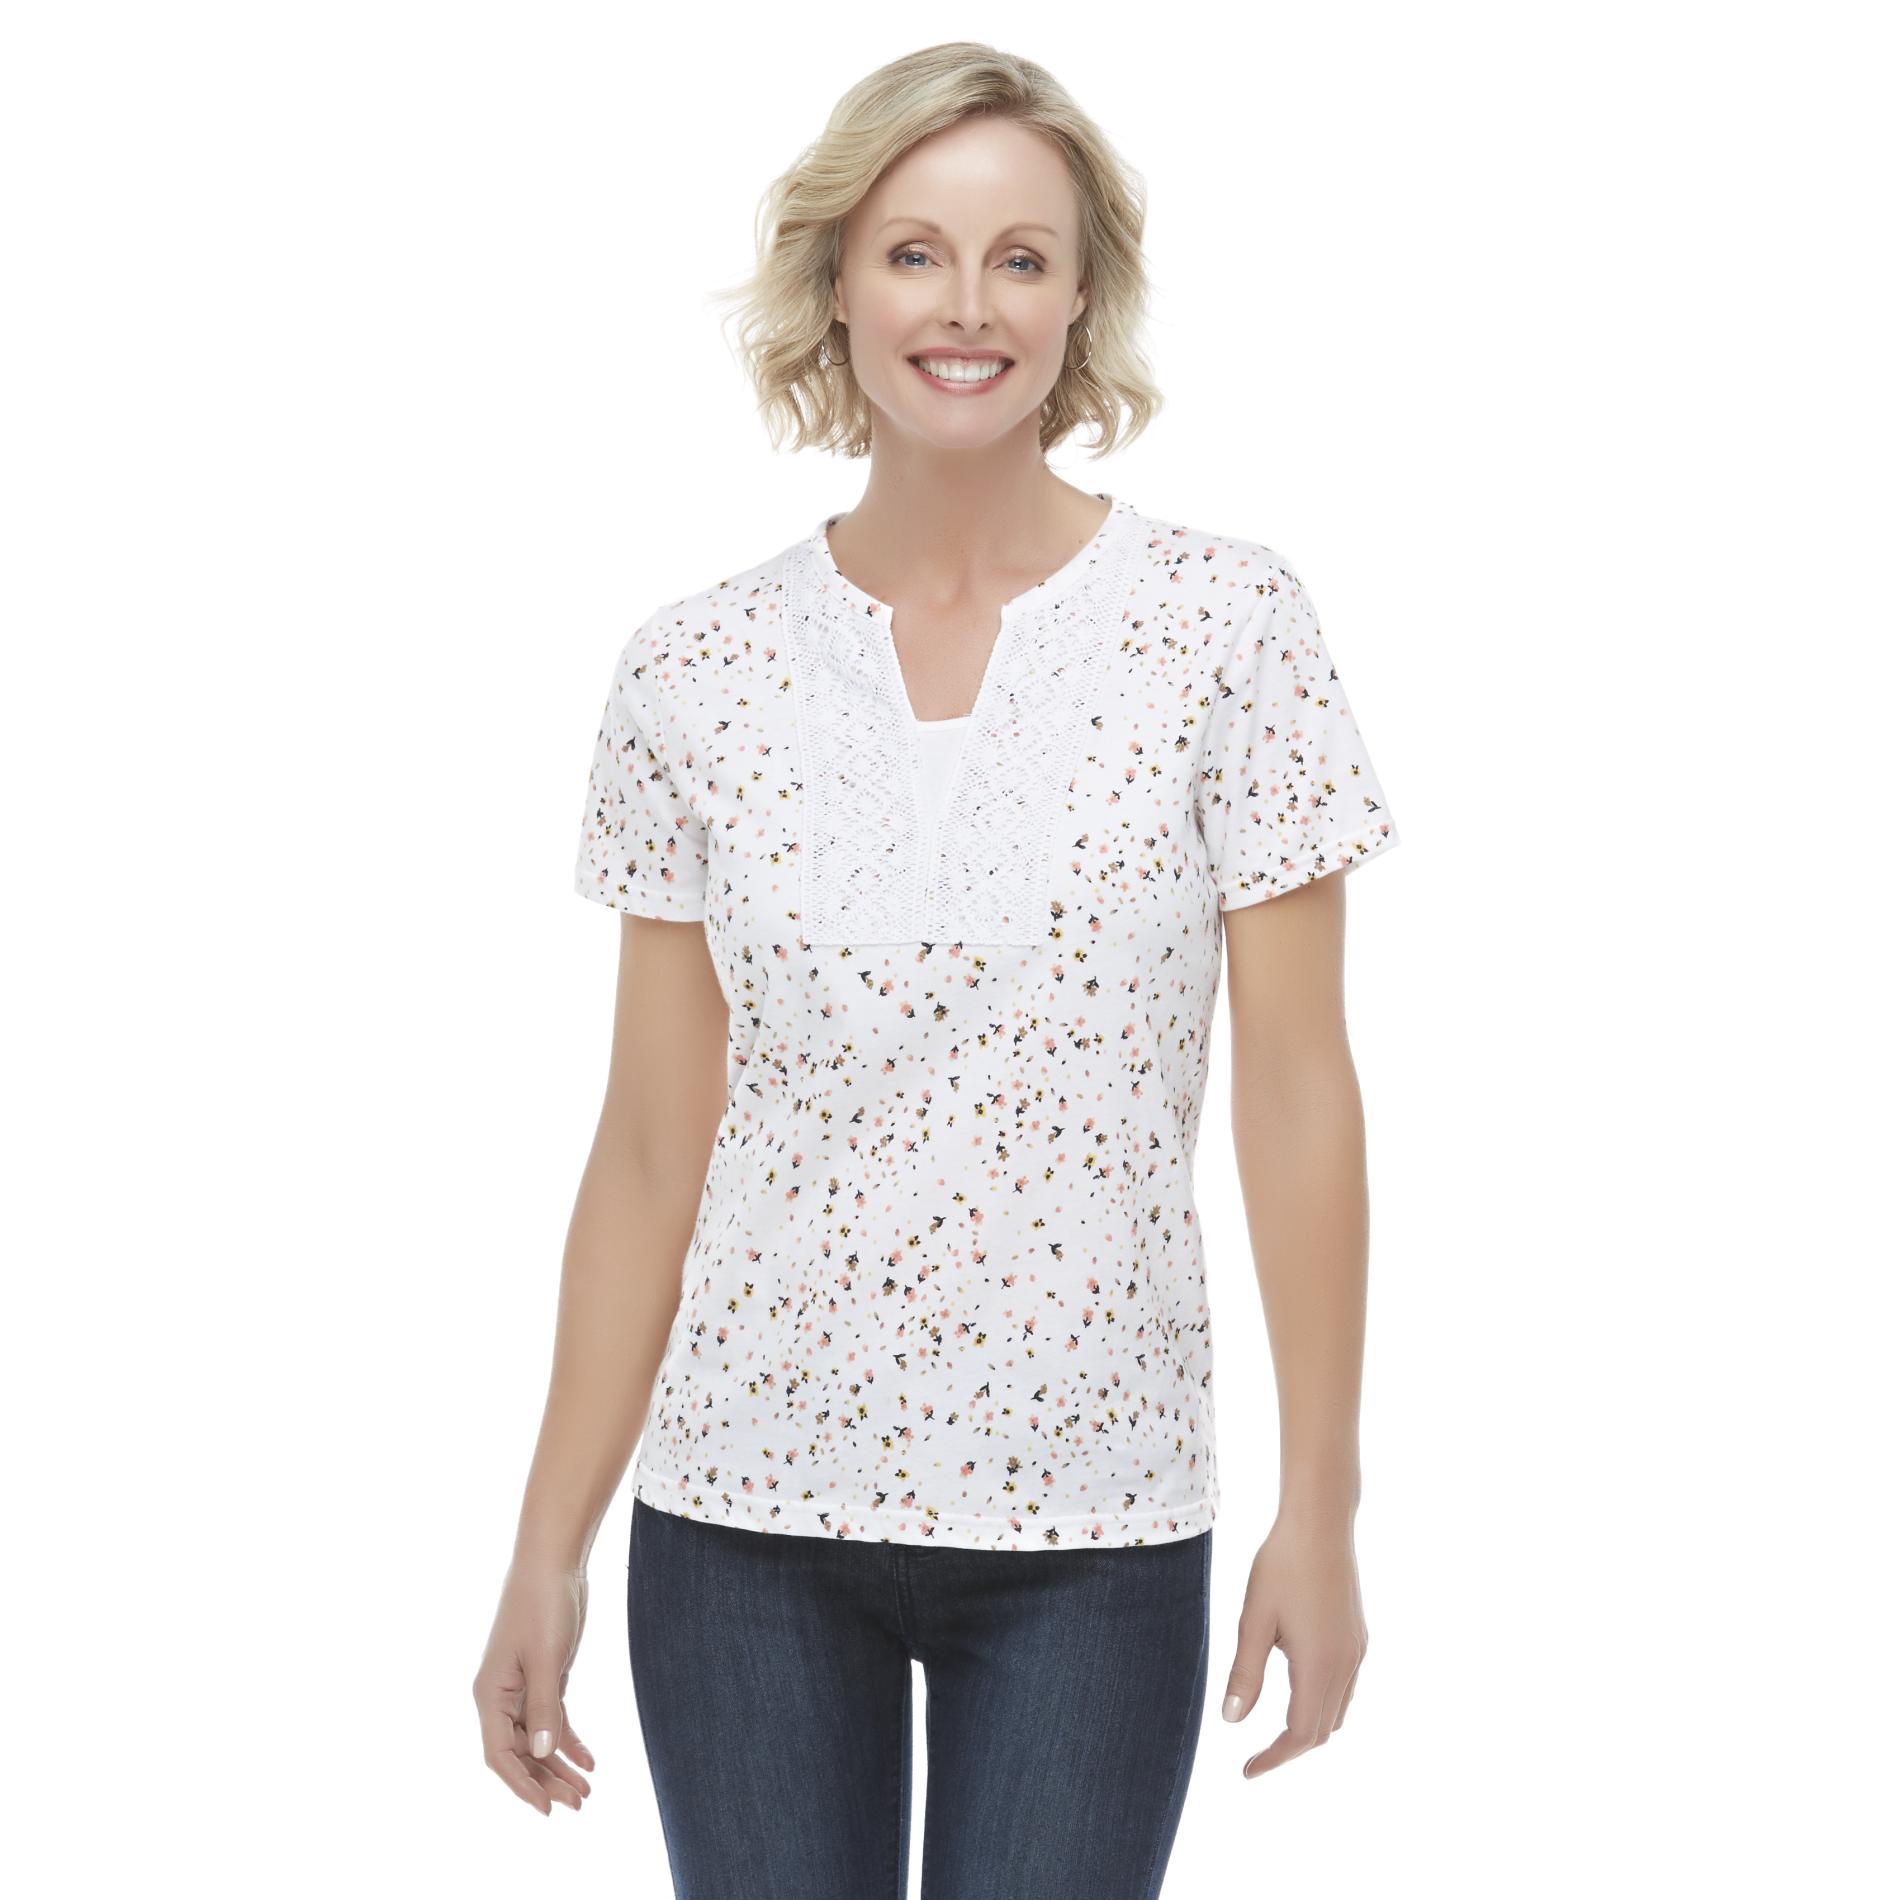 Basic Editions Women's Layered-Look Crochet T-Shirt - Floral